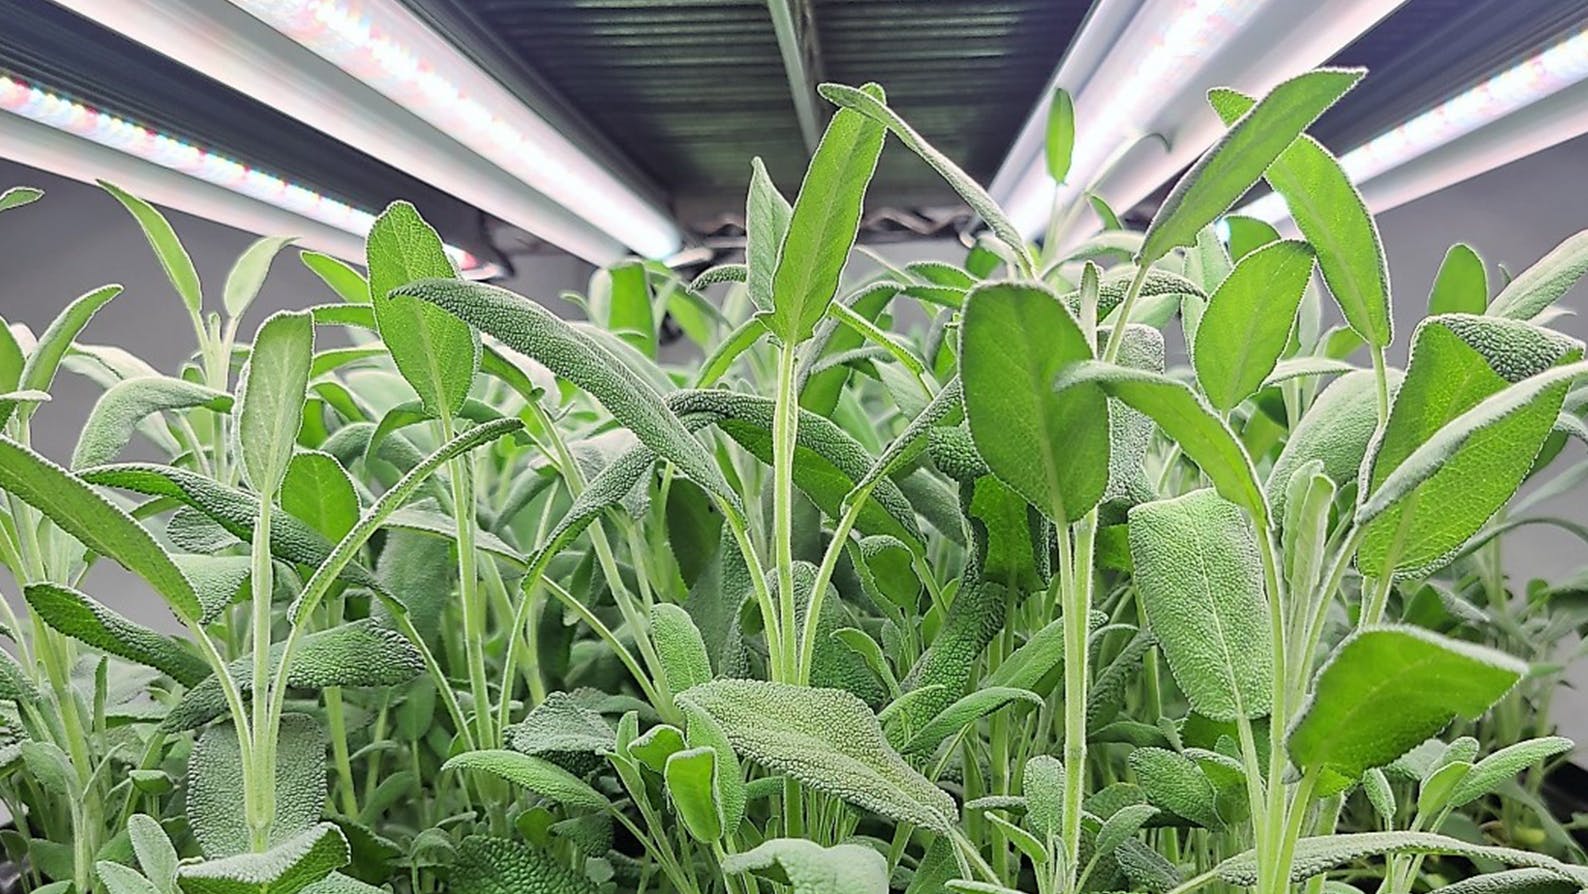 Plants and leaves in an indoor farming facility. 